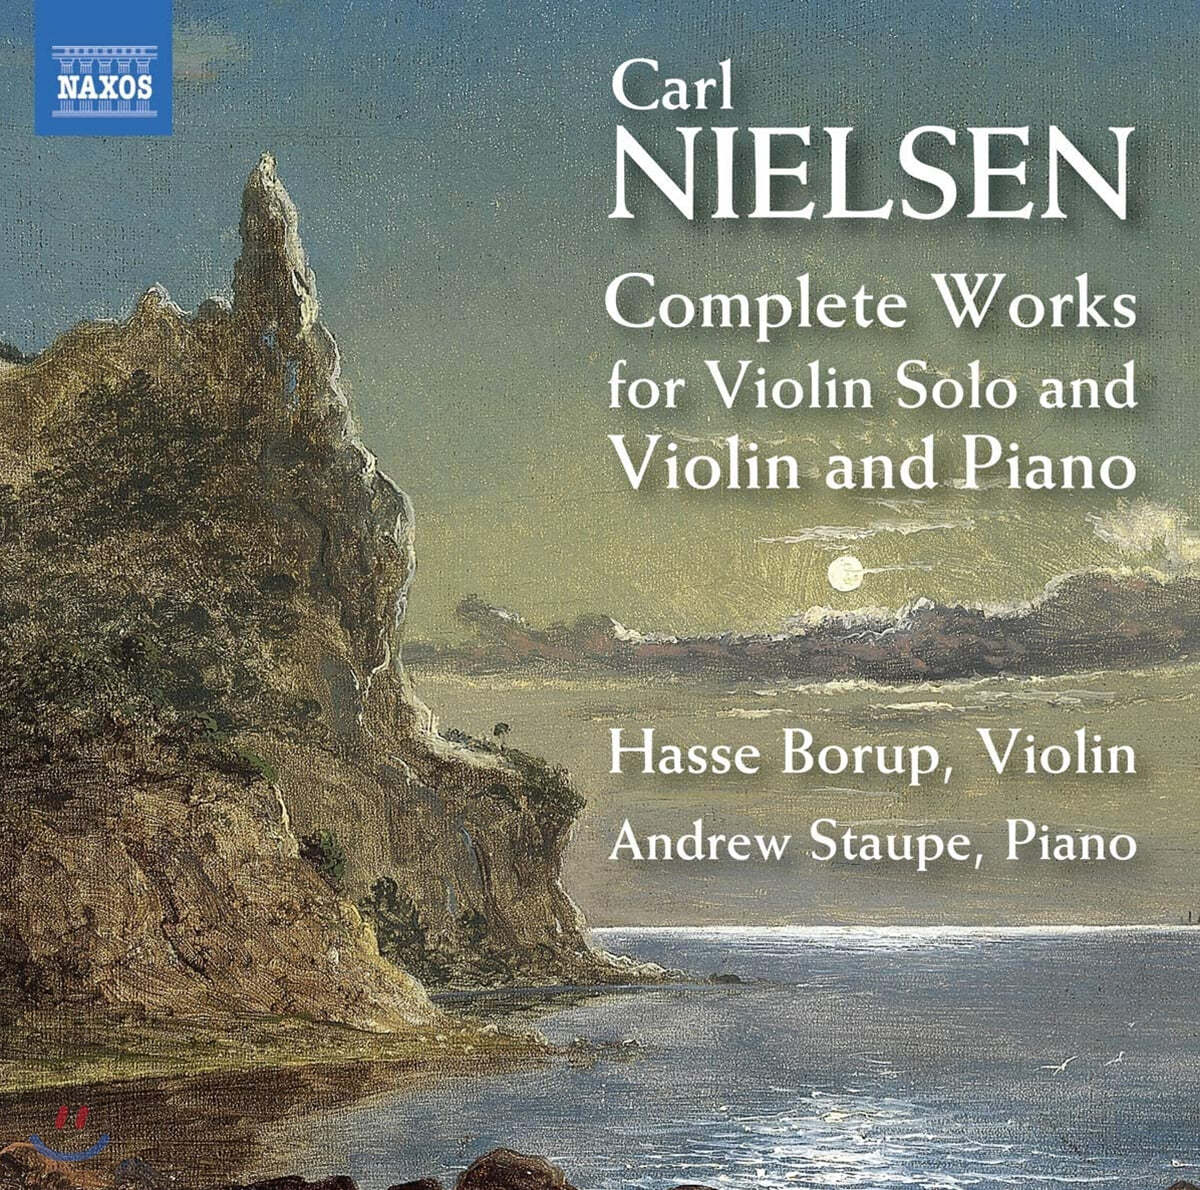 Hasse Borup 닐센: 바이올린을 위한 작품 전곡 (Nielsen: Complete Works for Violin Solo and Violin and Piano) 